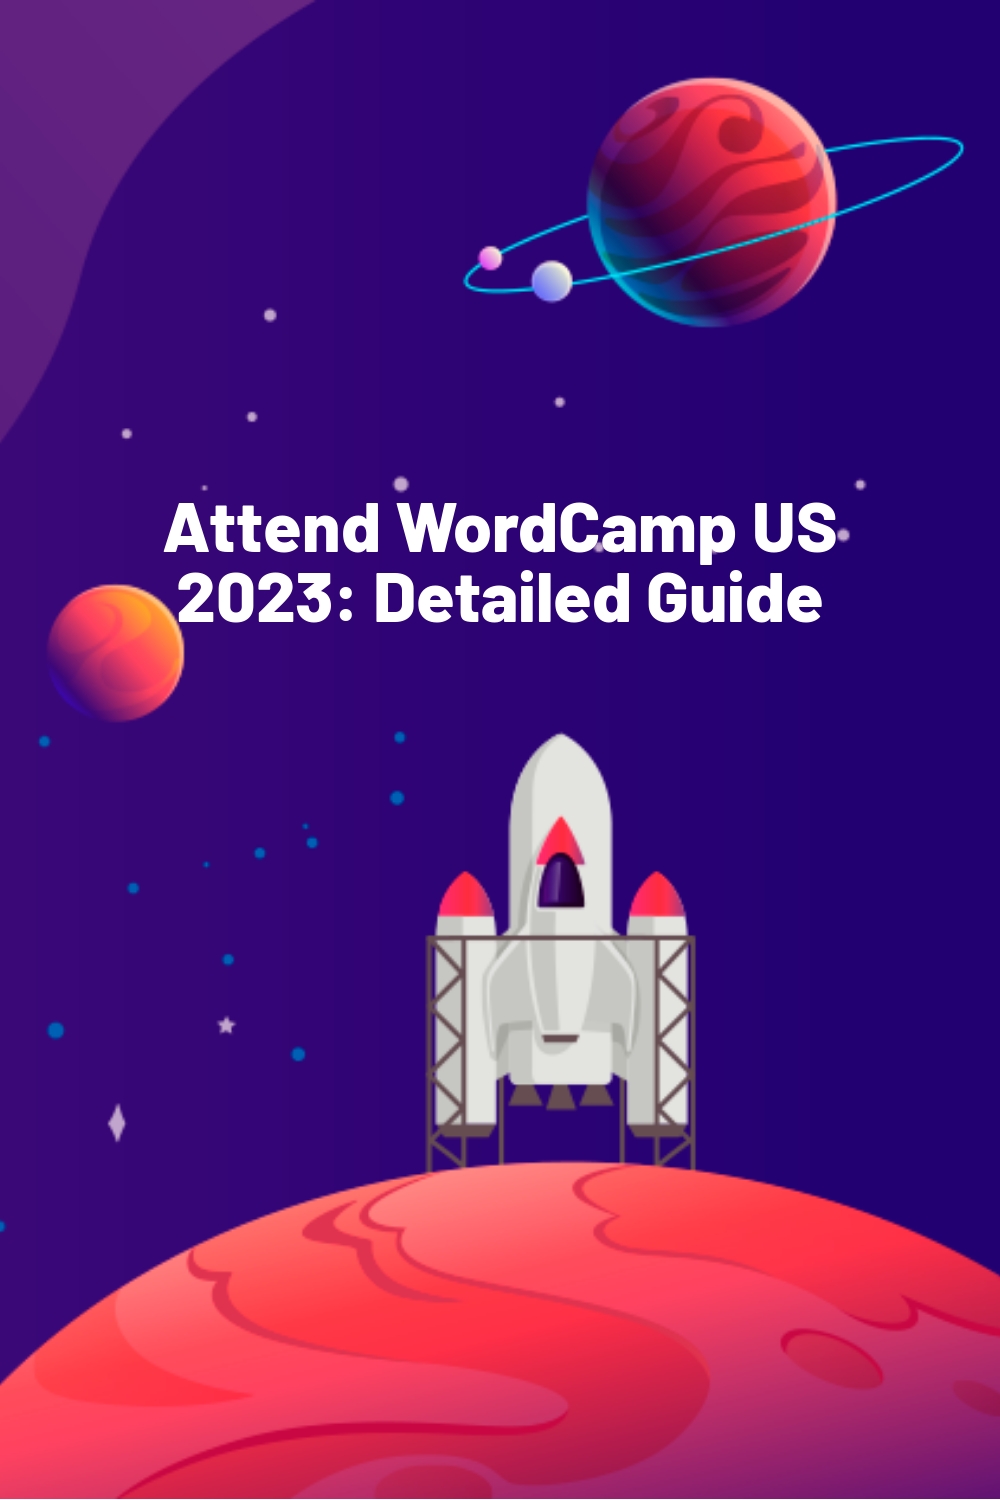 Attend WordCamp US 2023: Detailed Guide